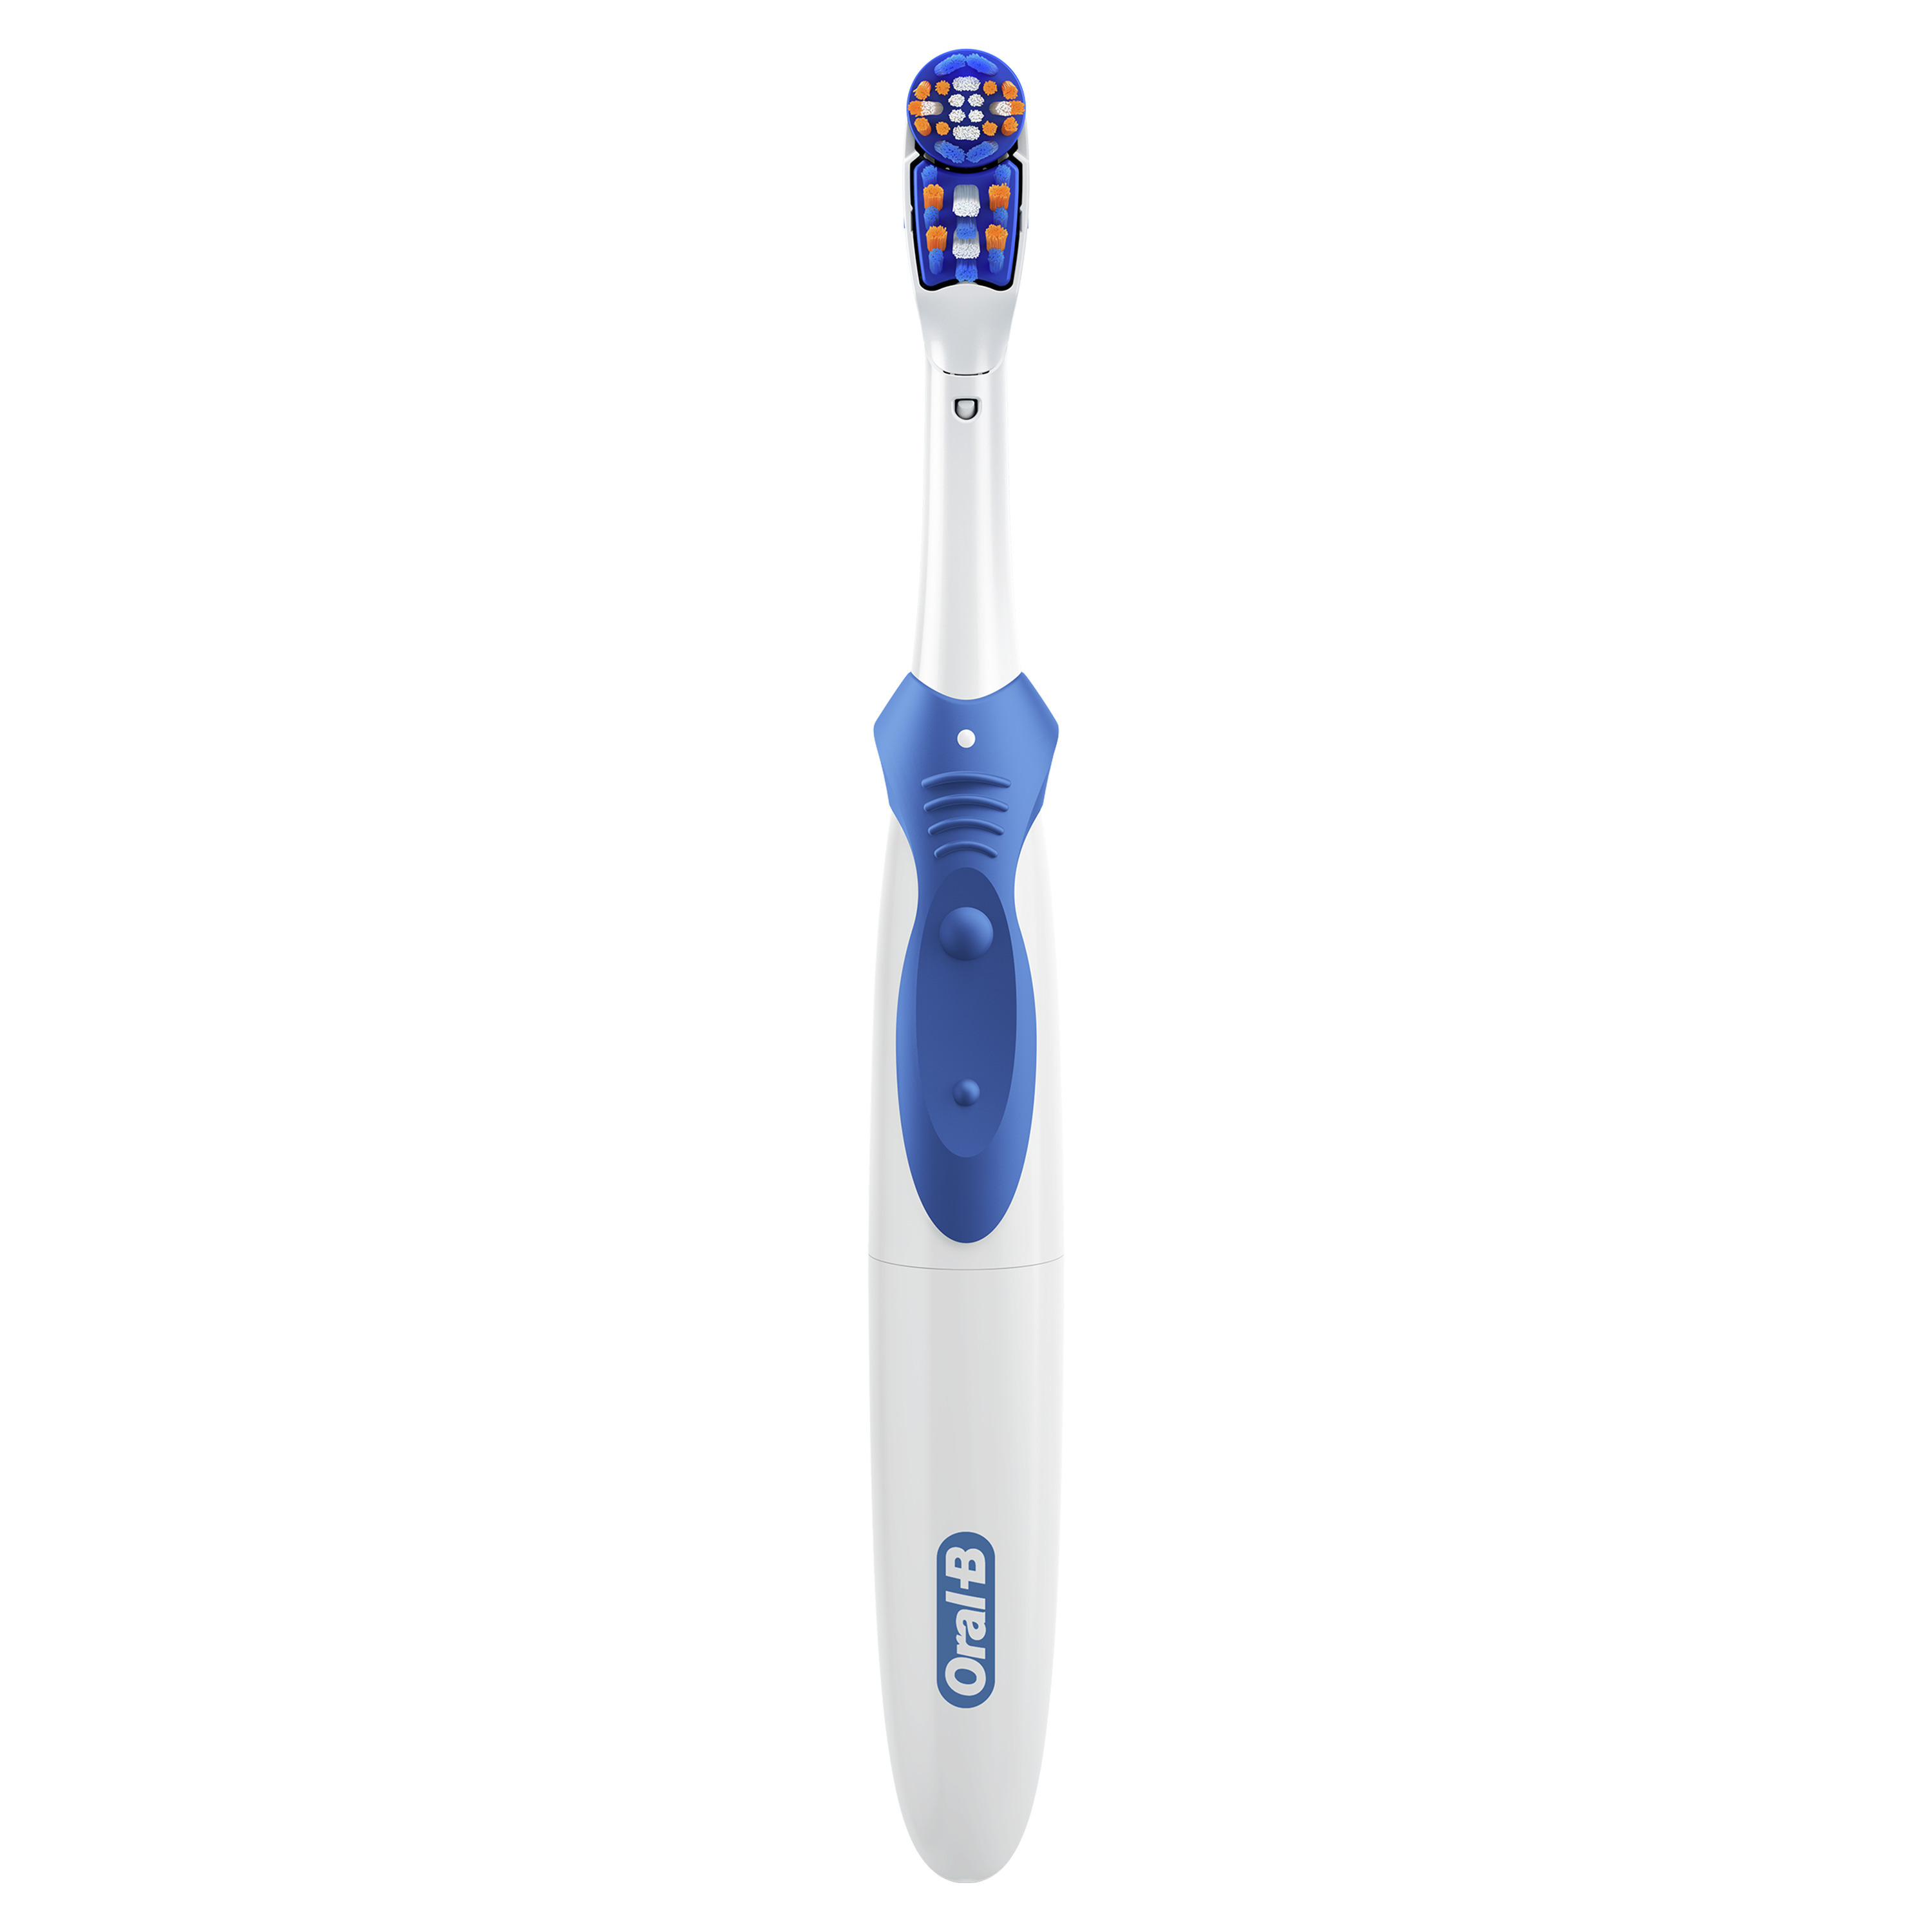 Oral-B Battery Powered Toothbrush Gum Care, 1 Count, Full Head, for Adults and Children 3+ - image 2 of 8